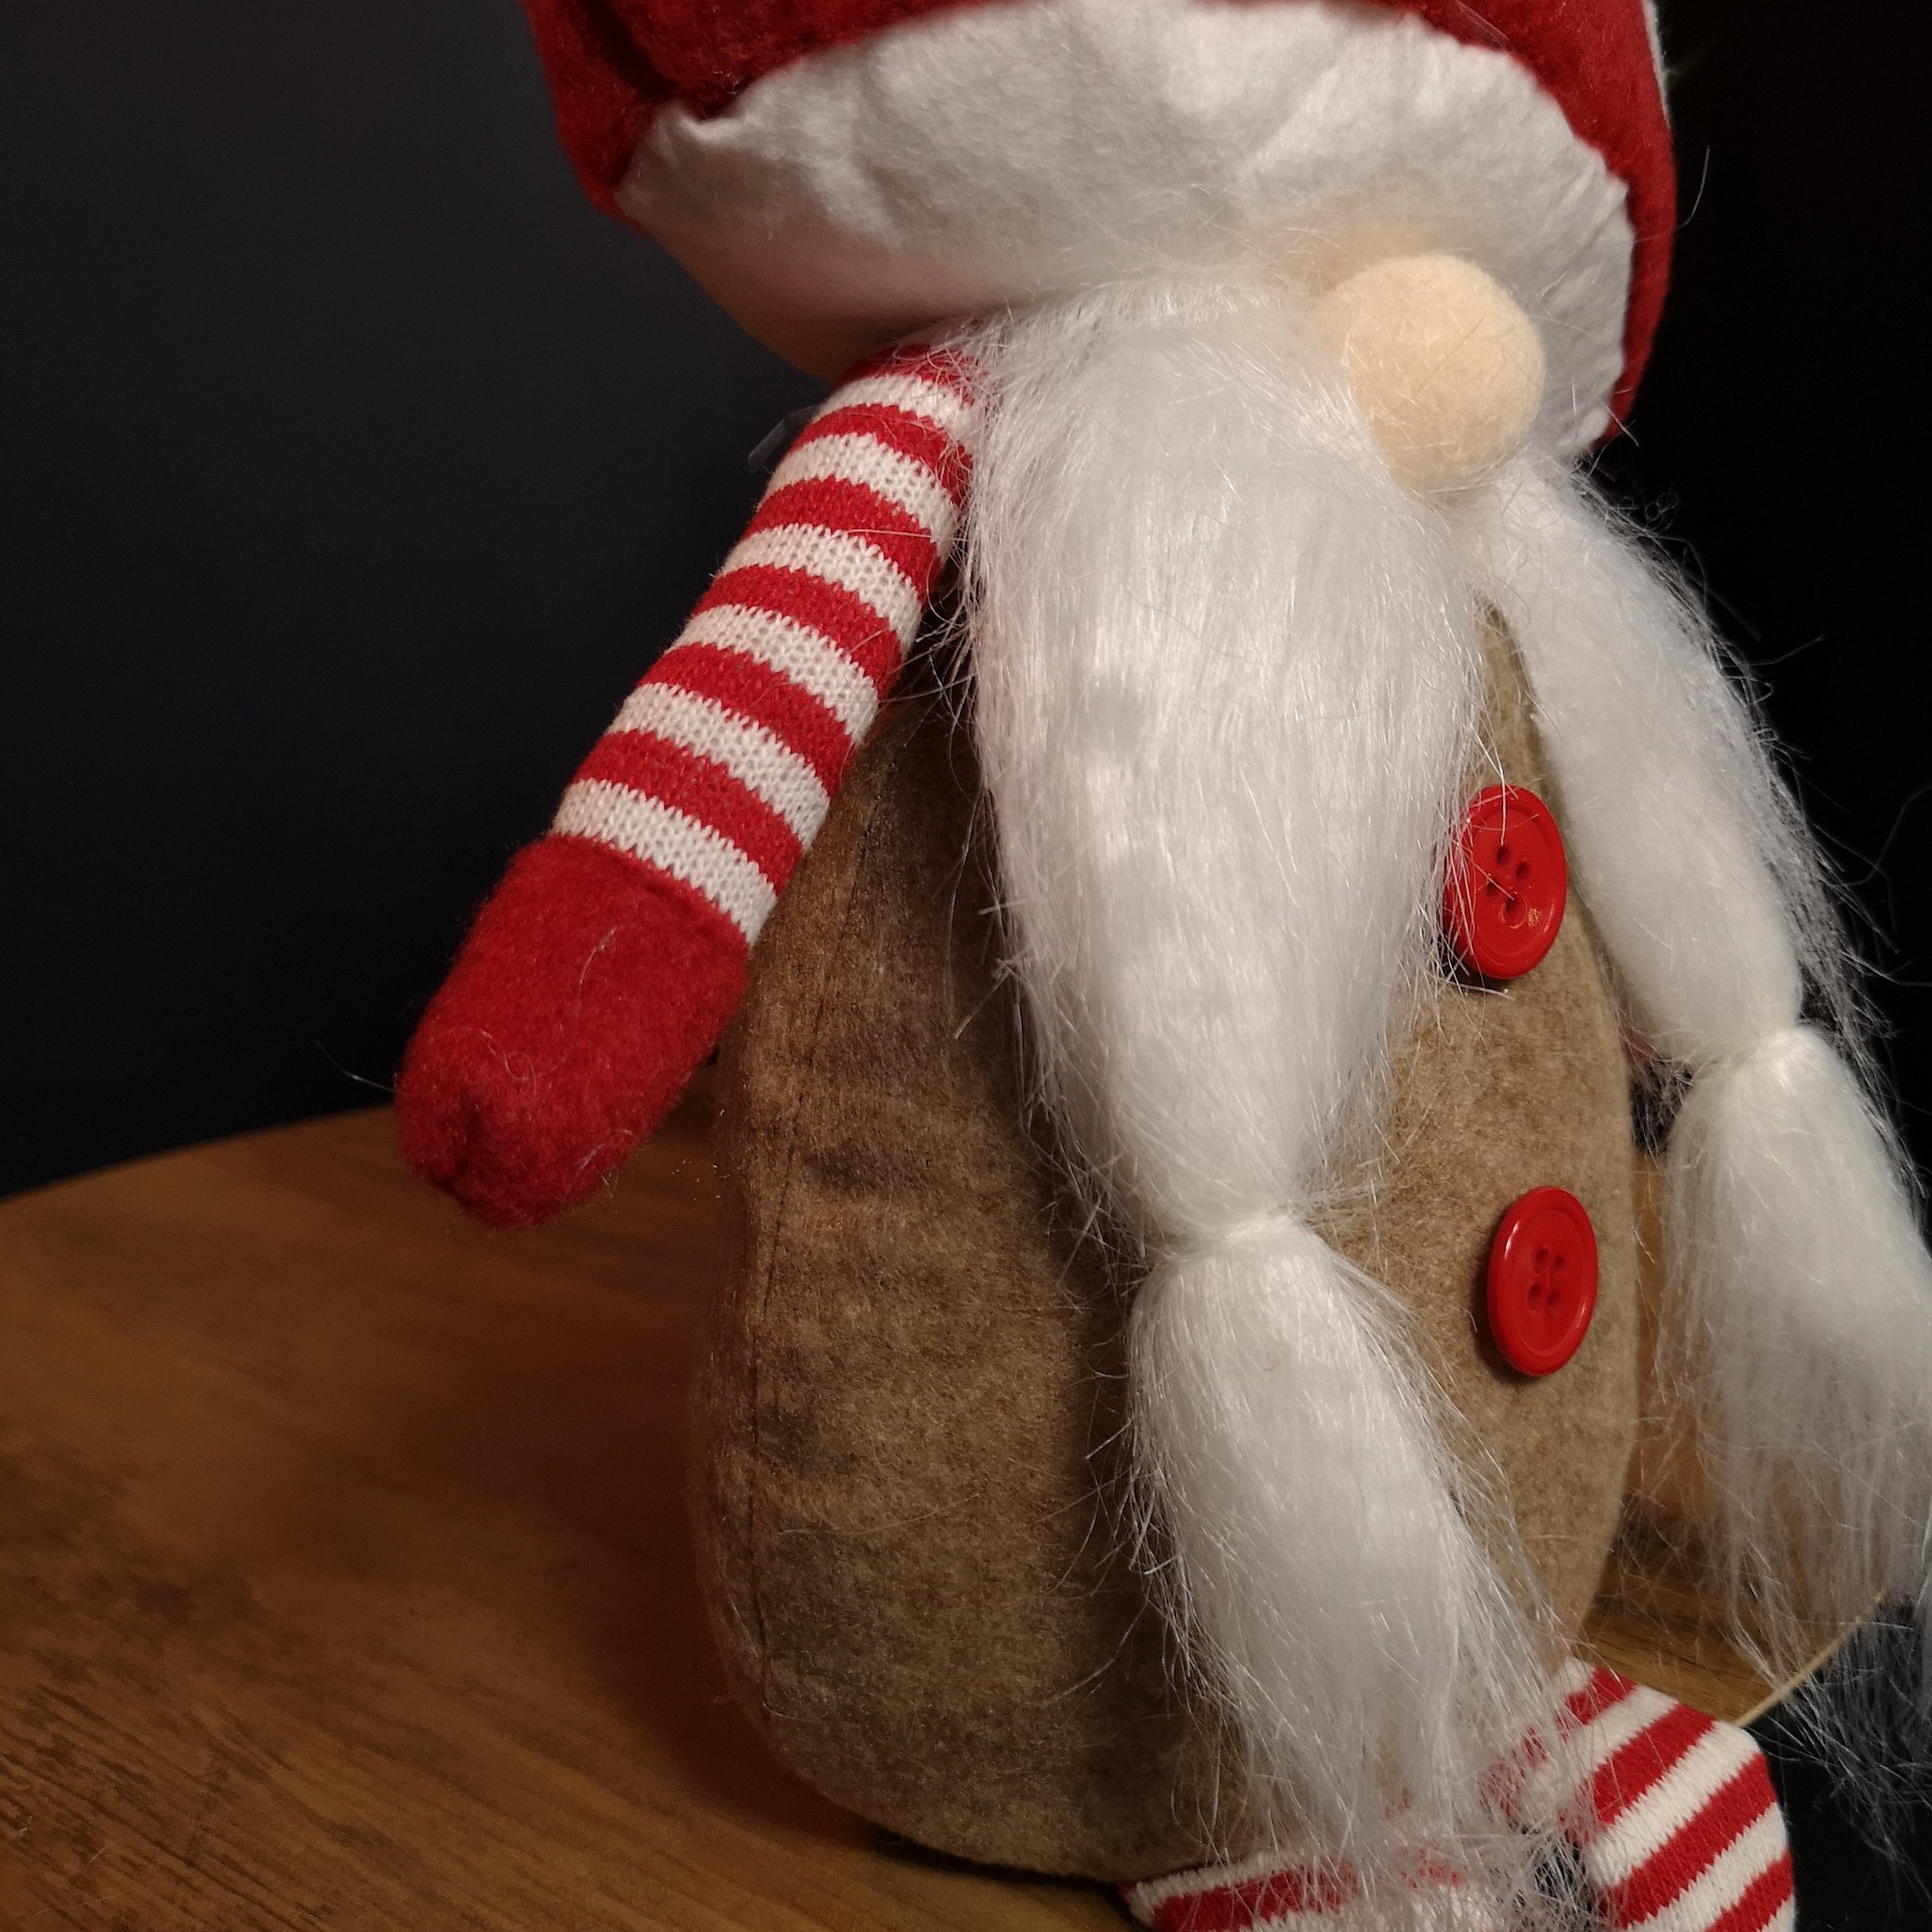 53cm Stripey Red Plush Sitting Christmas Girl Gonk with Dangly Legs and Mushroom Hat